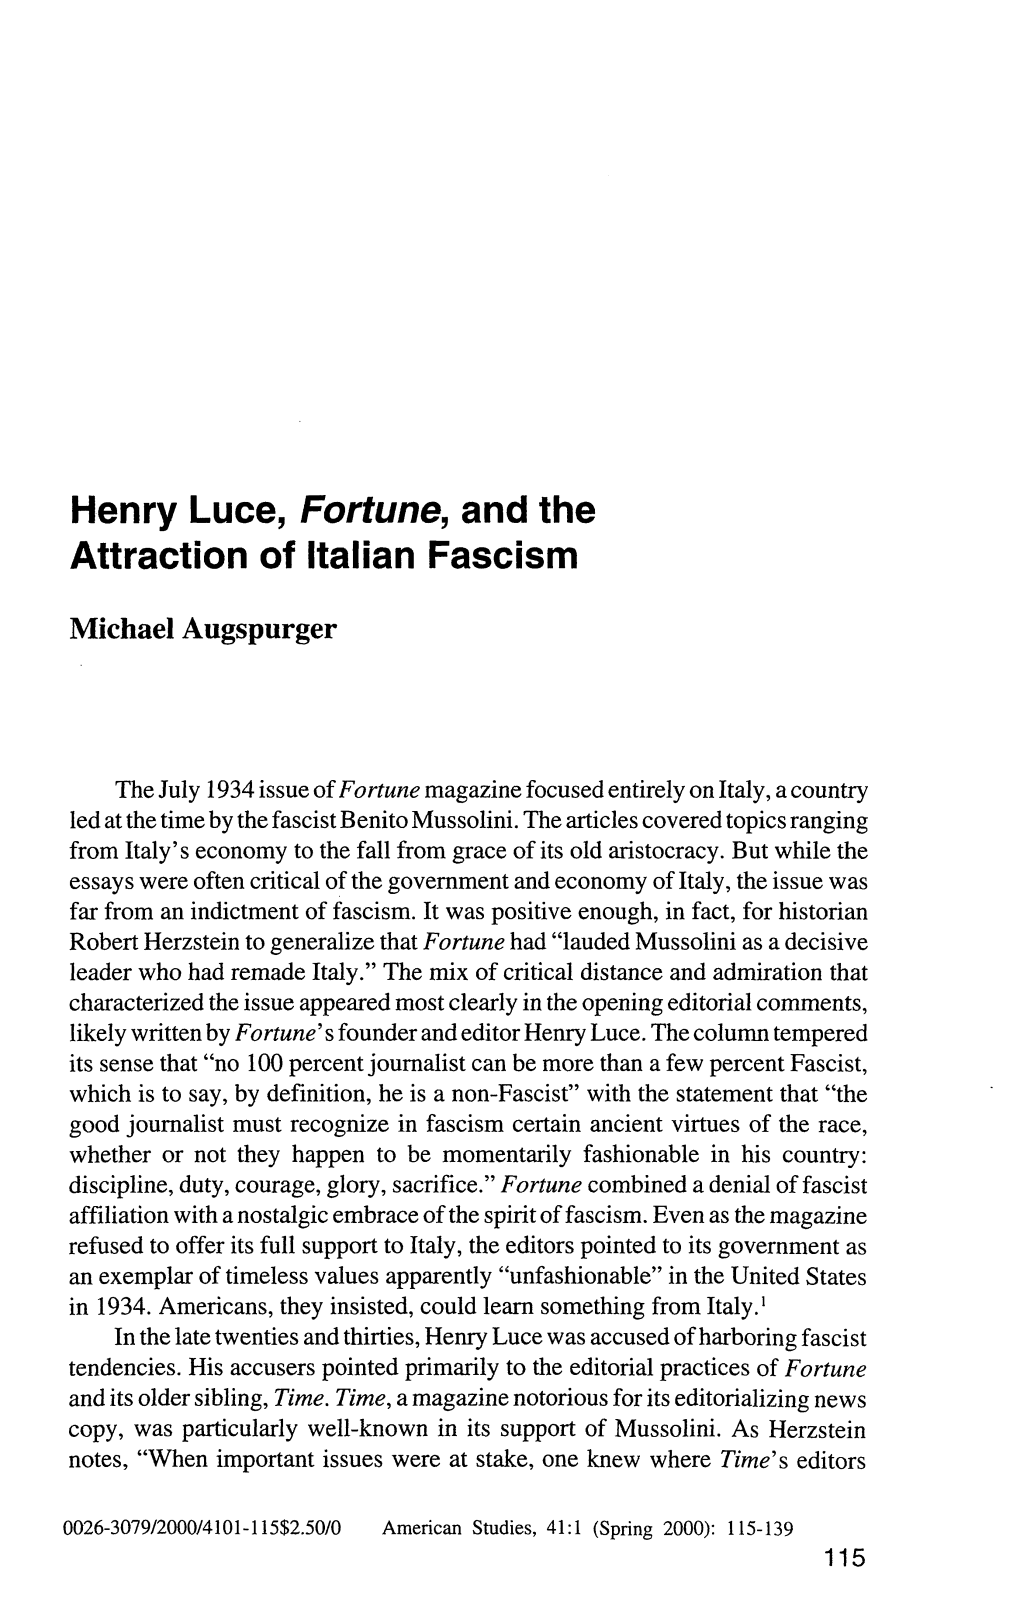 Henry Luce, Fortune, and the Attraction of Italian Fascism Michael Augspurger